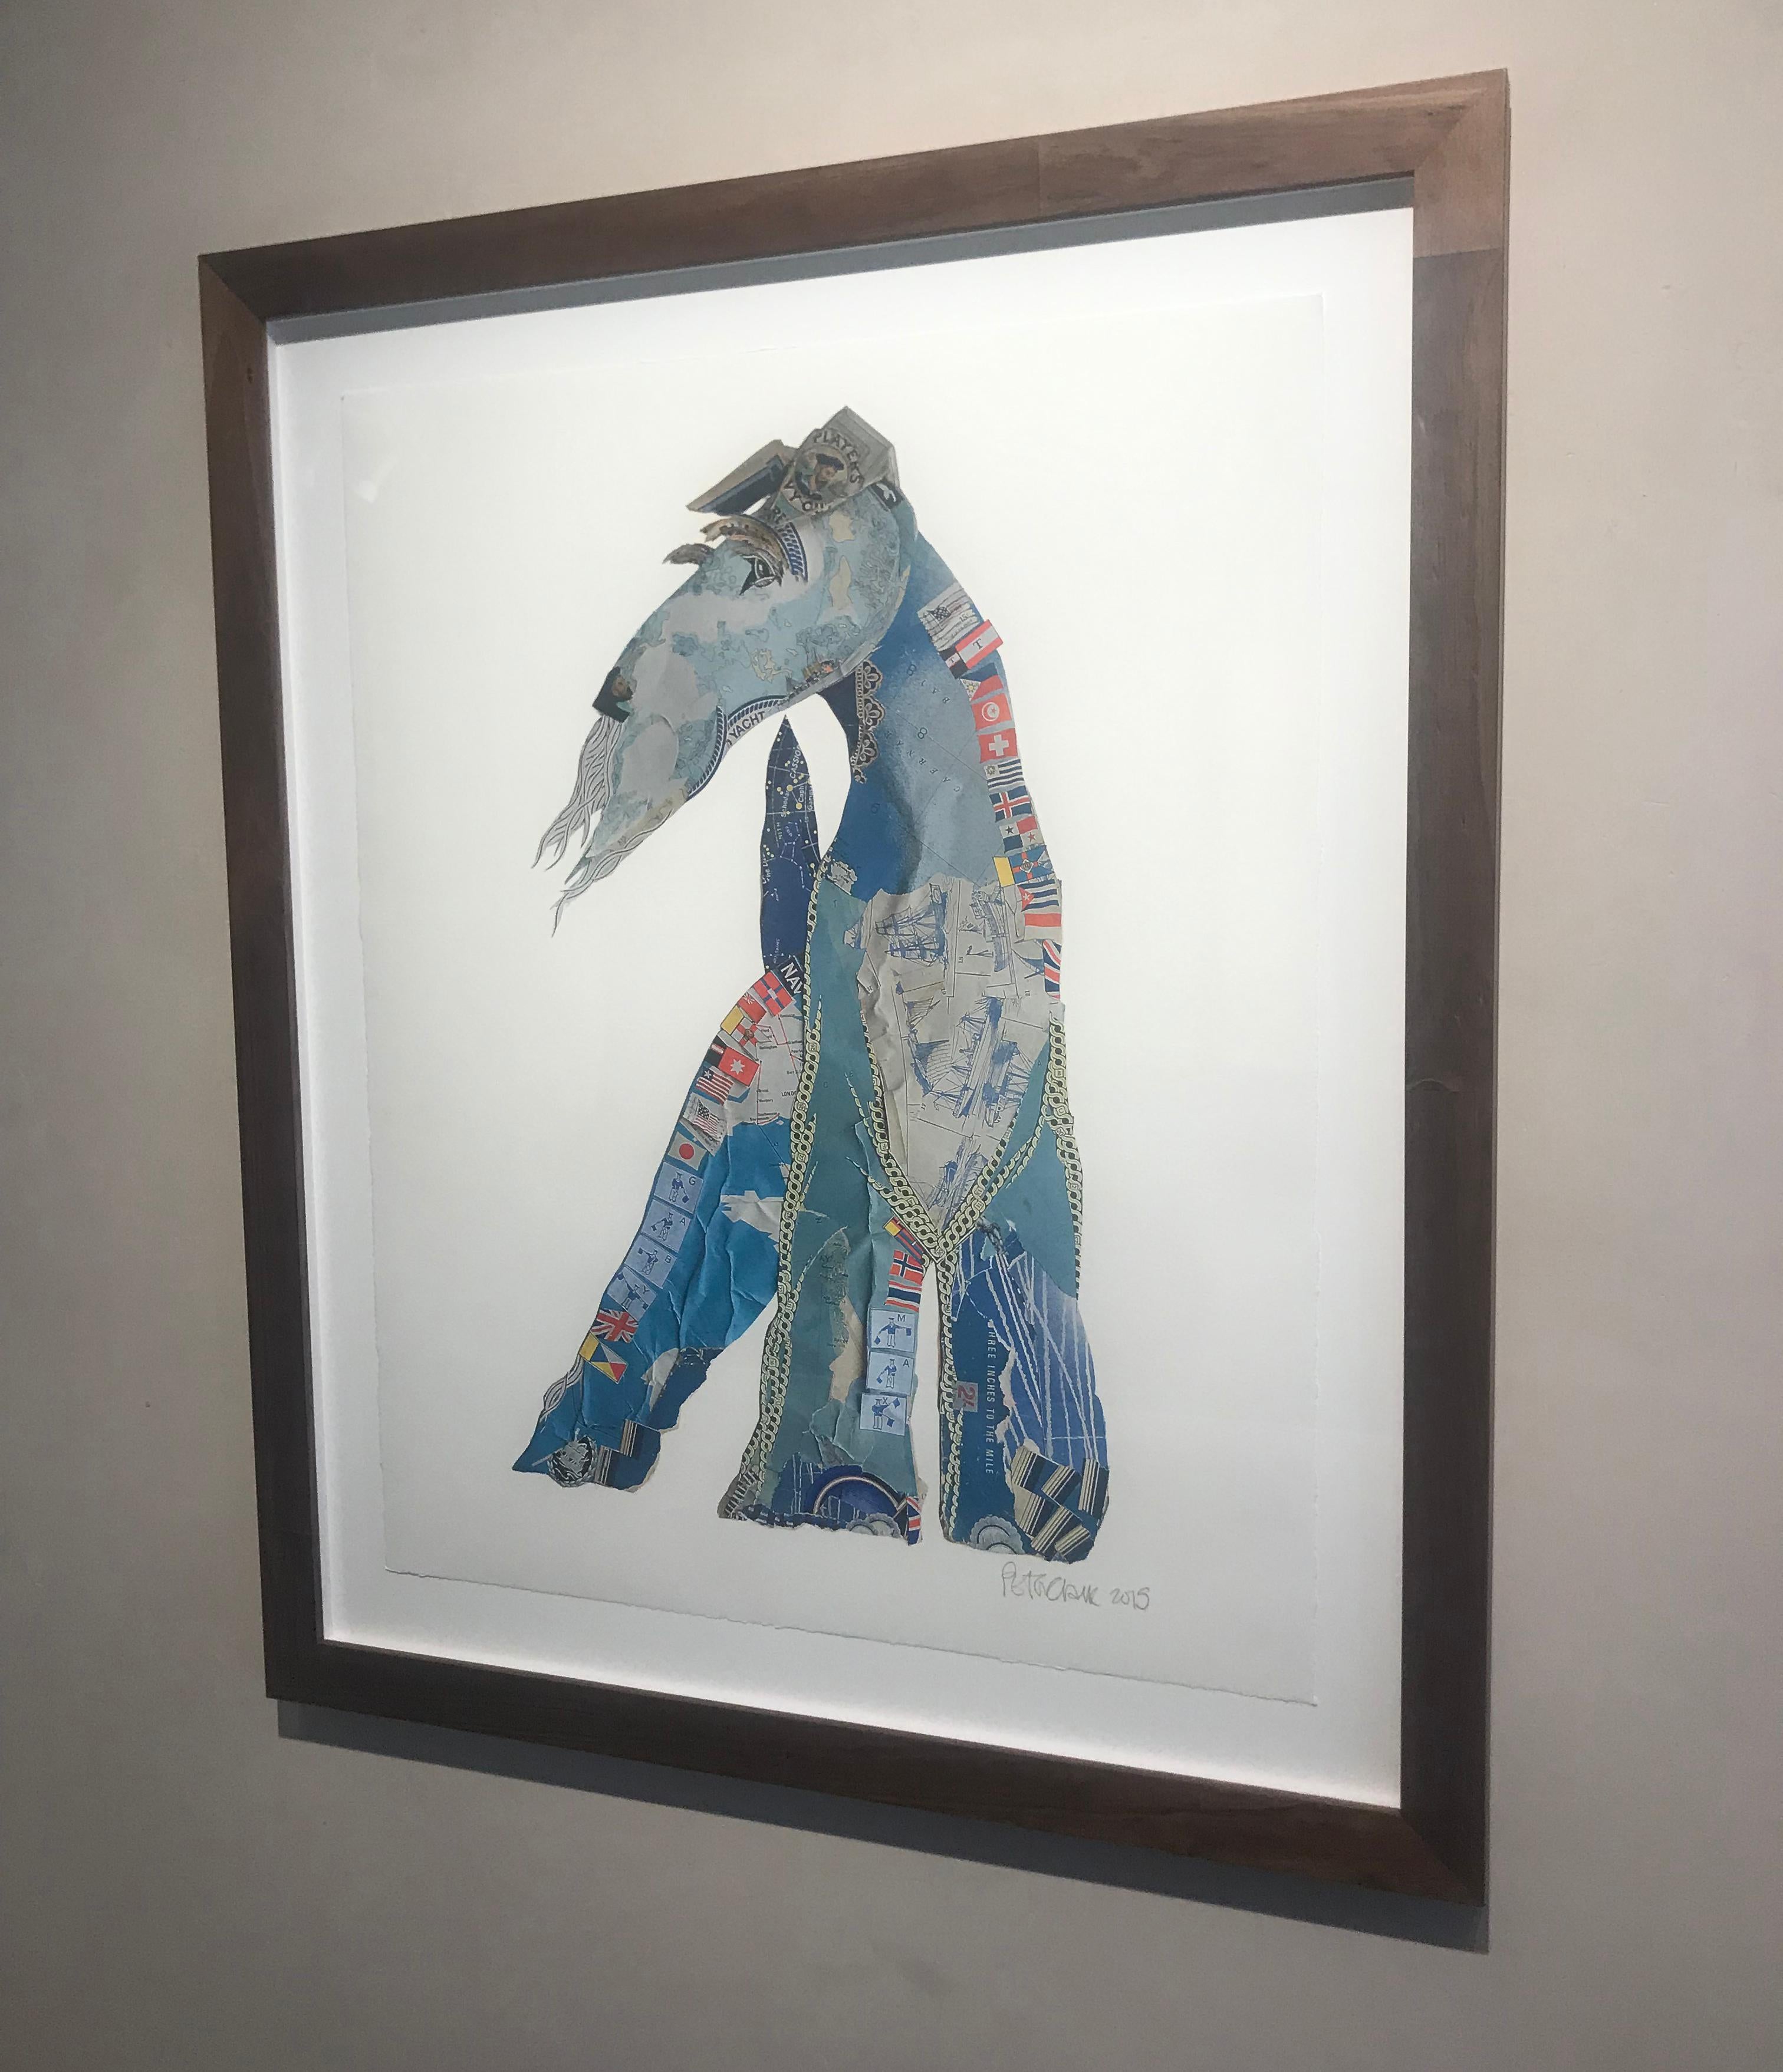 Sea Dog - Contemporary Print by Peter Clark